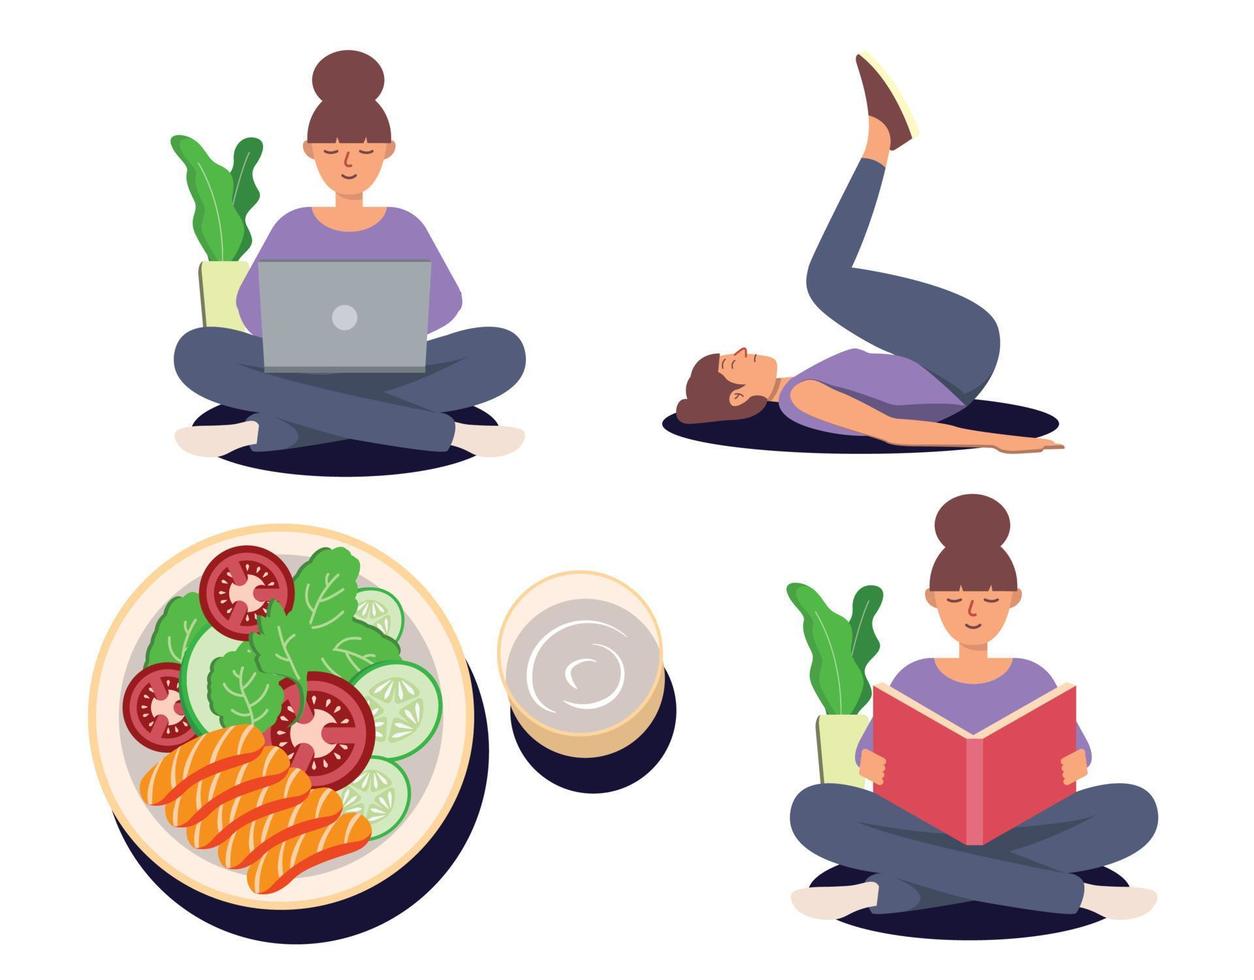 Healthy food, lifestyle and exercise illustration vector